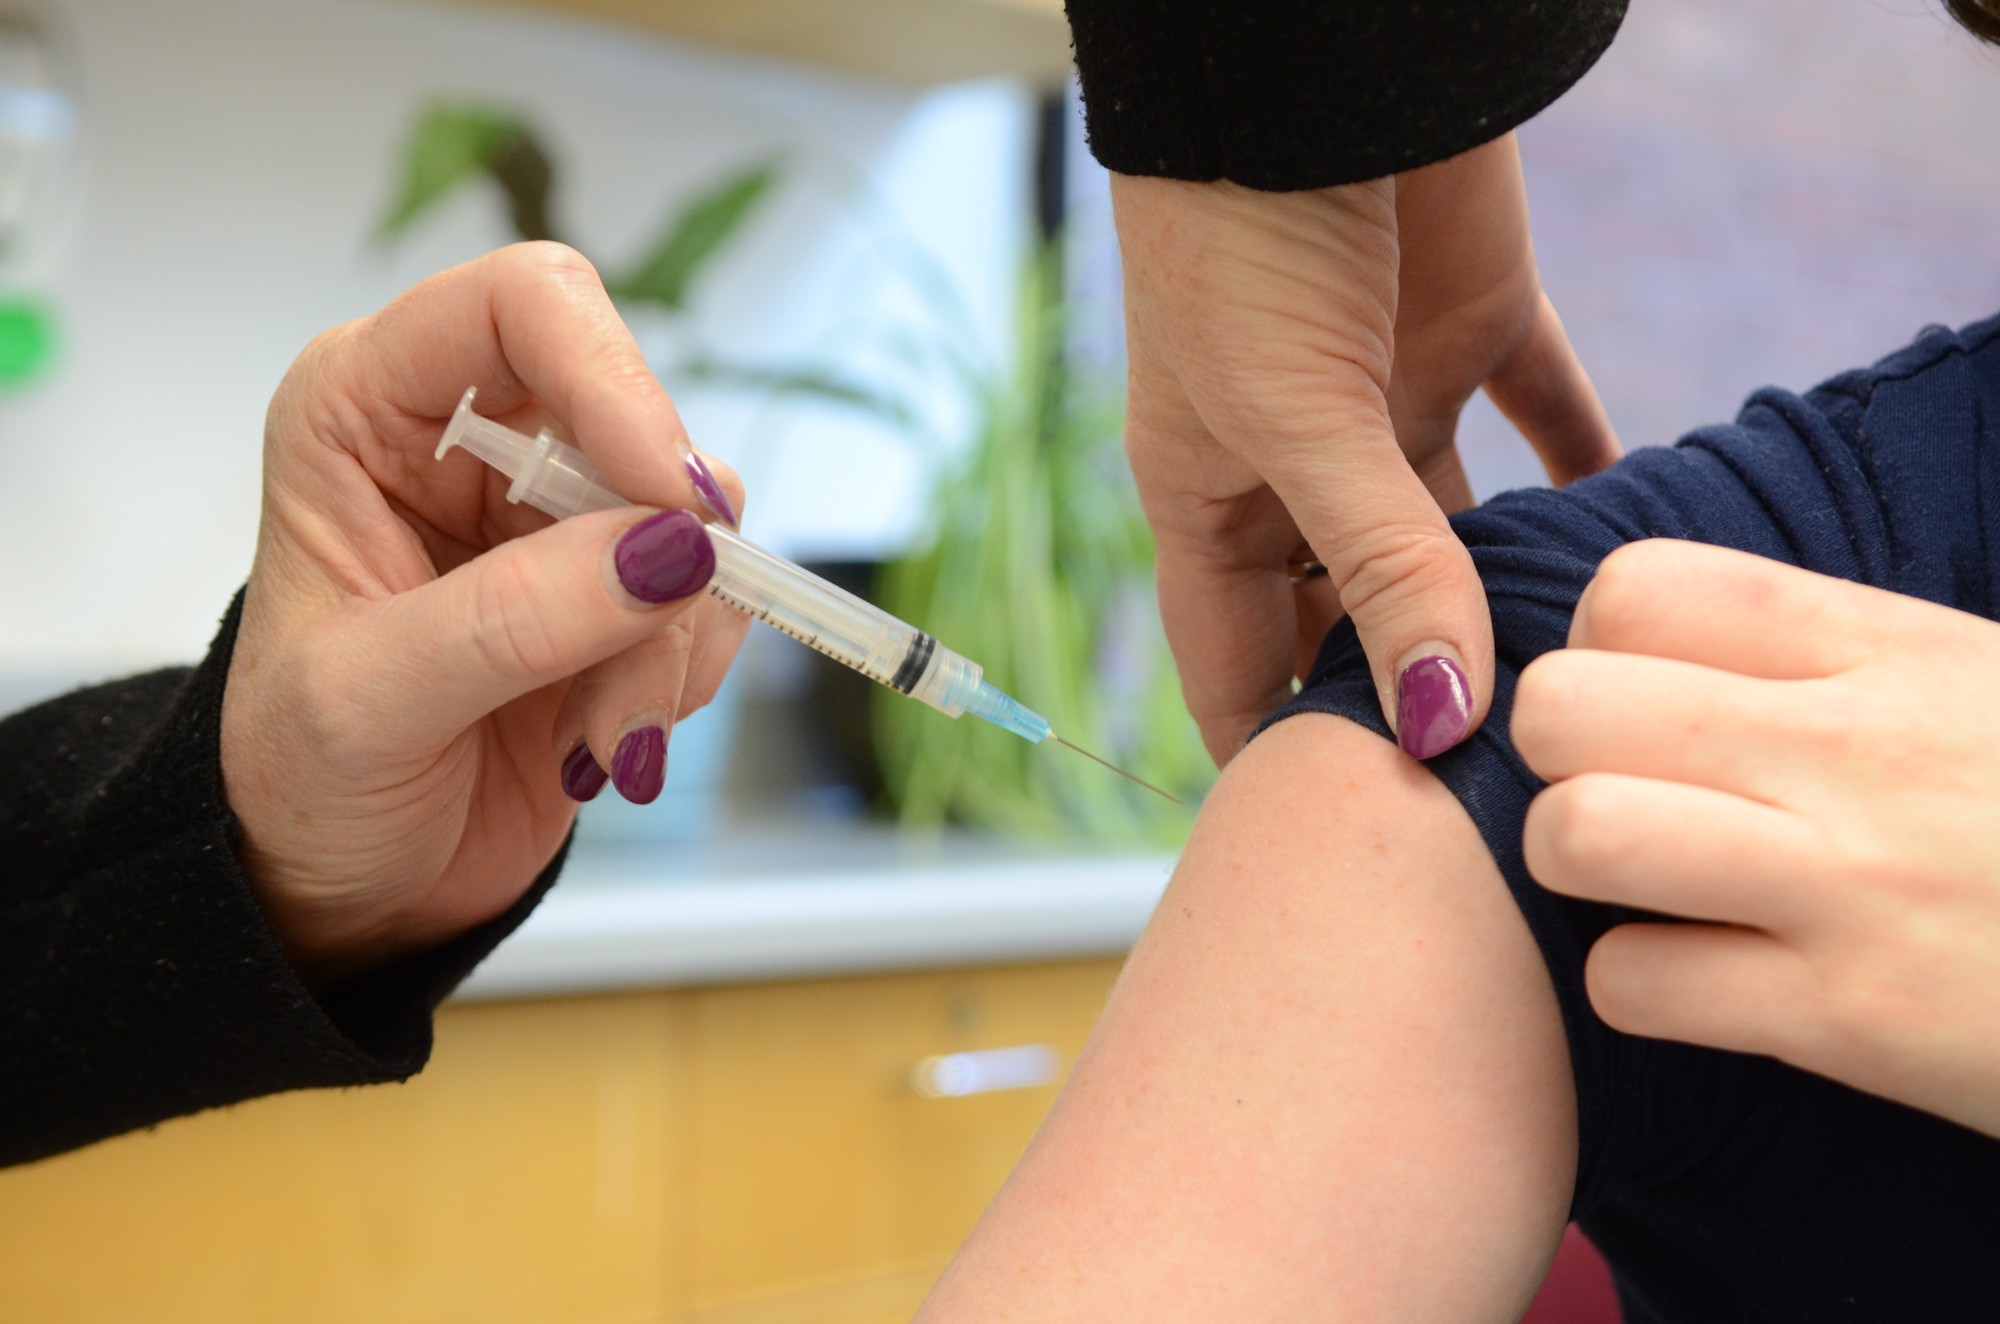 A Health Services nurse administering the flu shot vaccine at Algonquin College's Health Services.